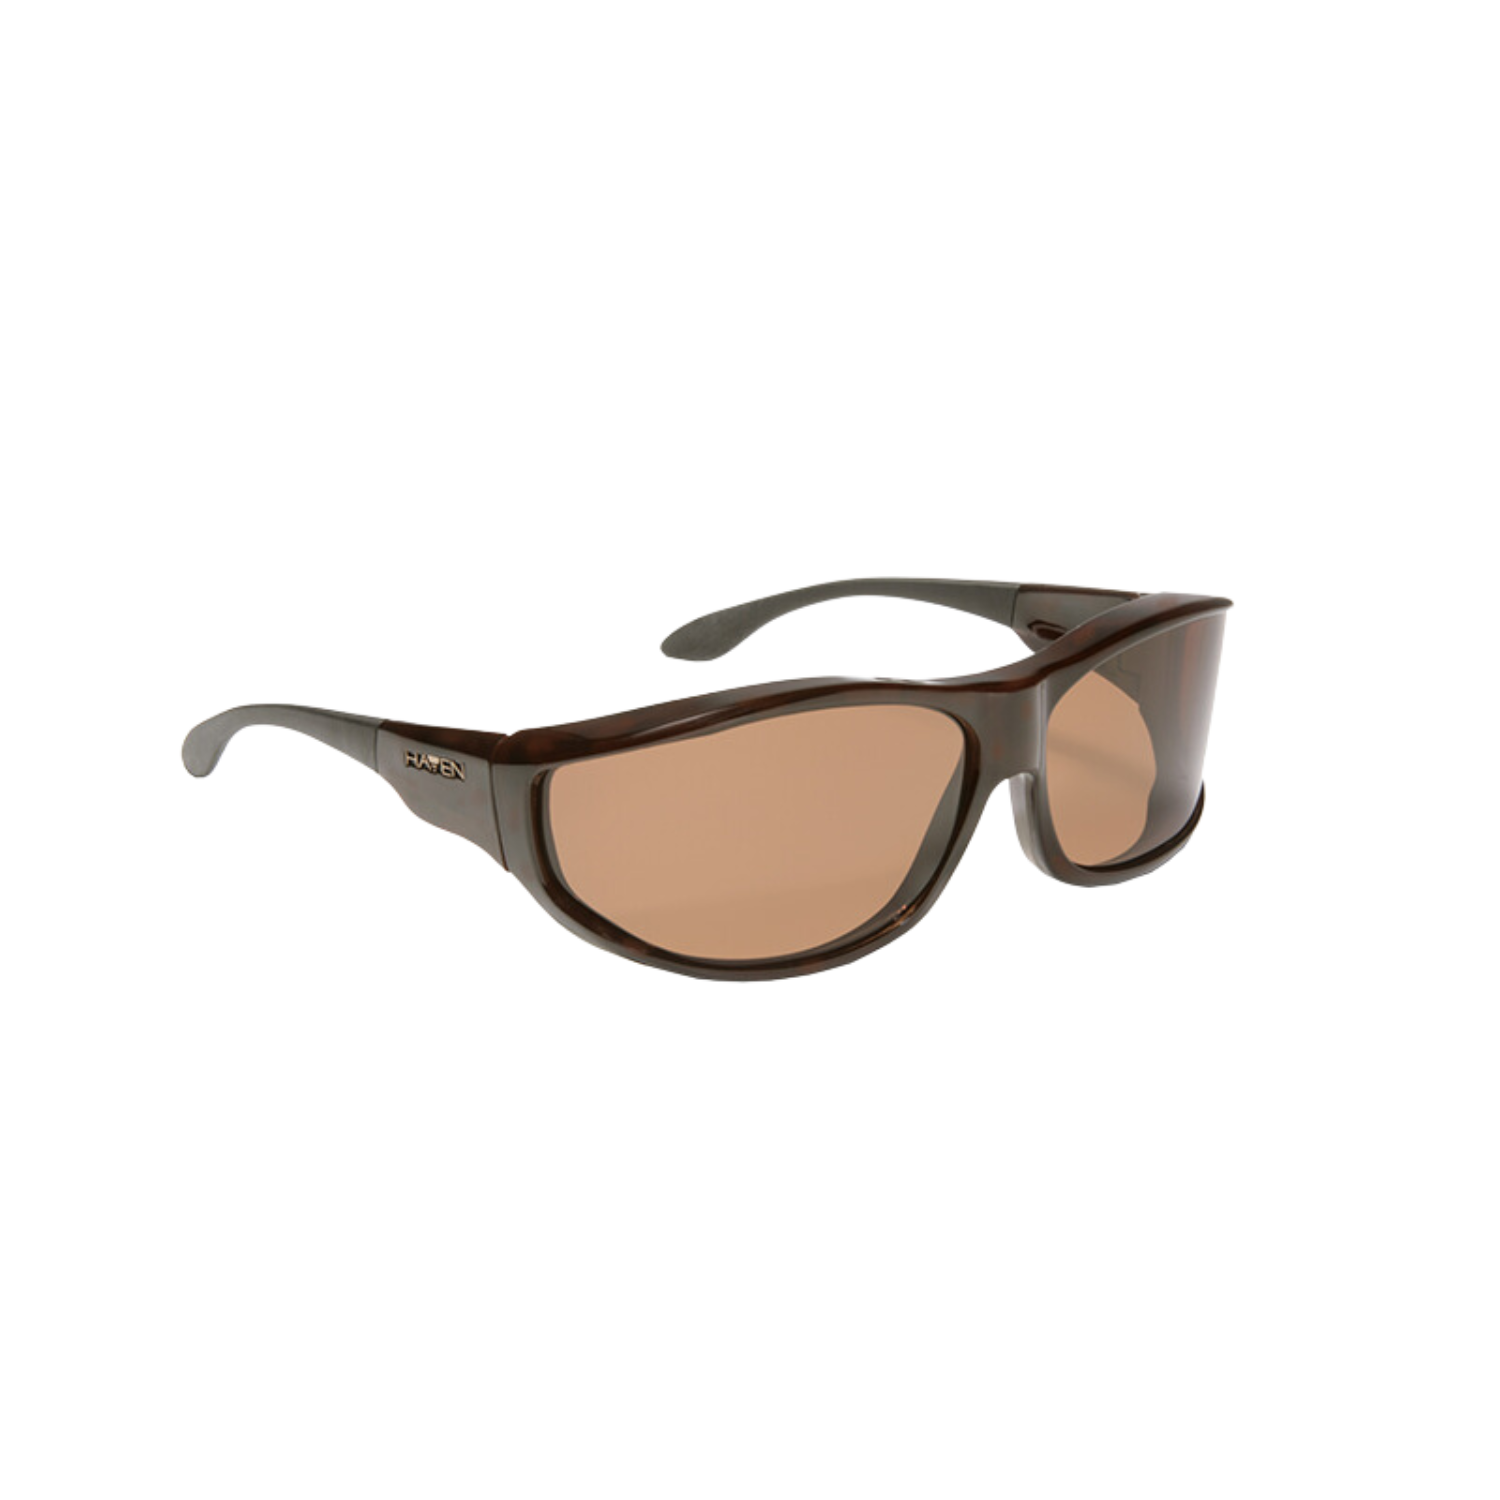 Image of the Eschenbach Haven Malloy large fit-over polarized sunglasses with brown frames and amber tint.